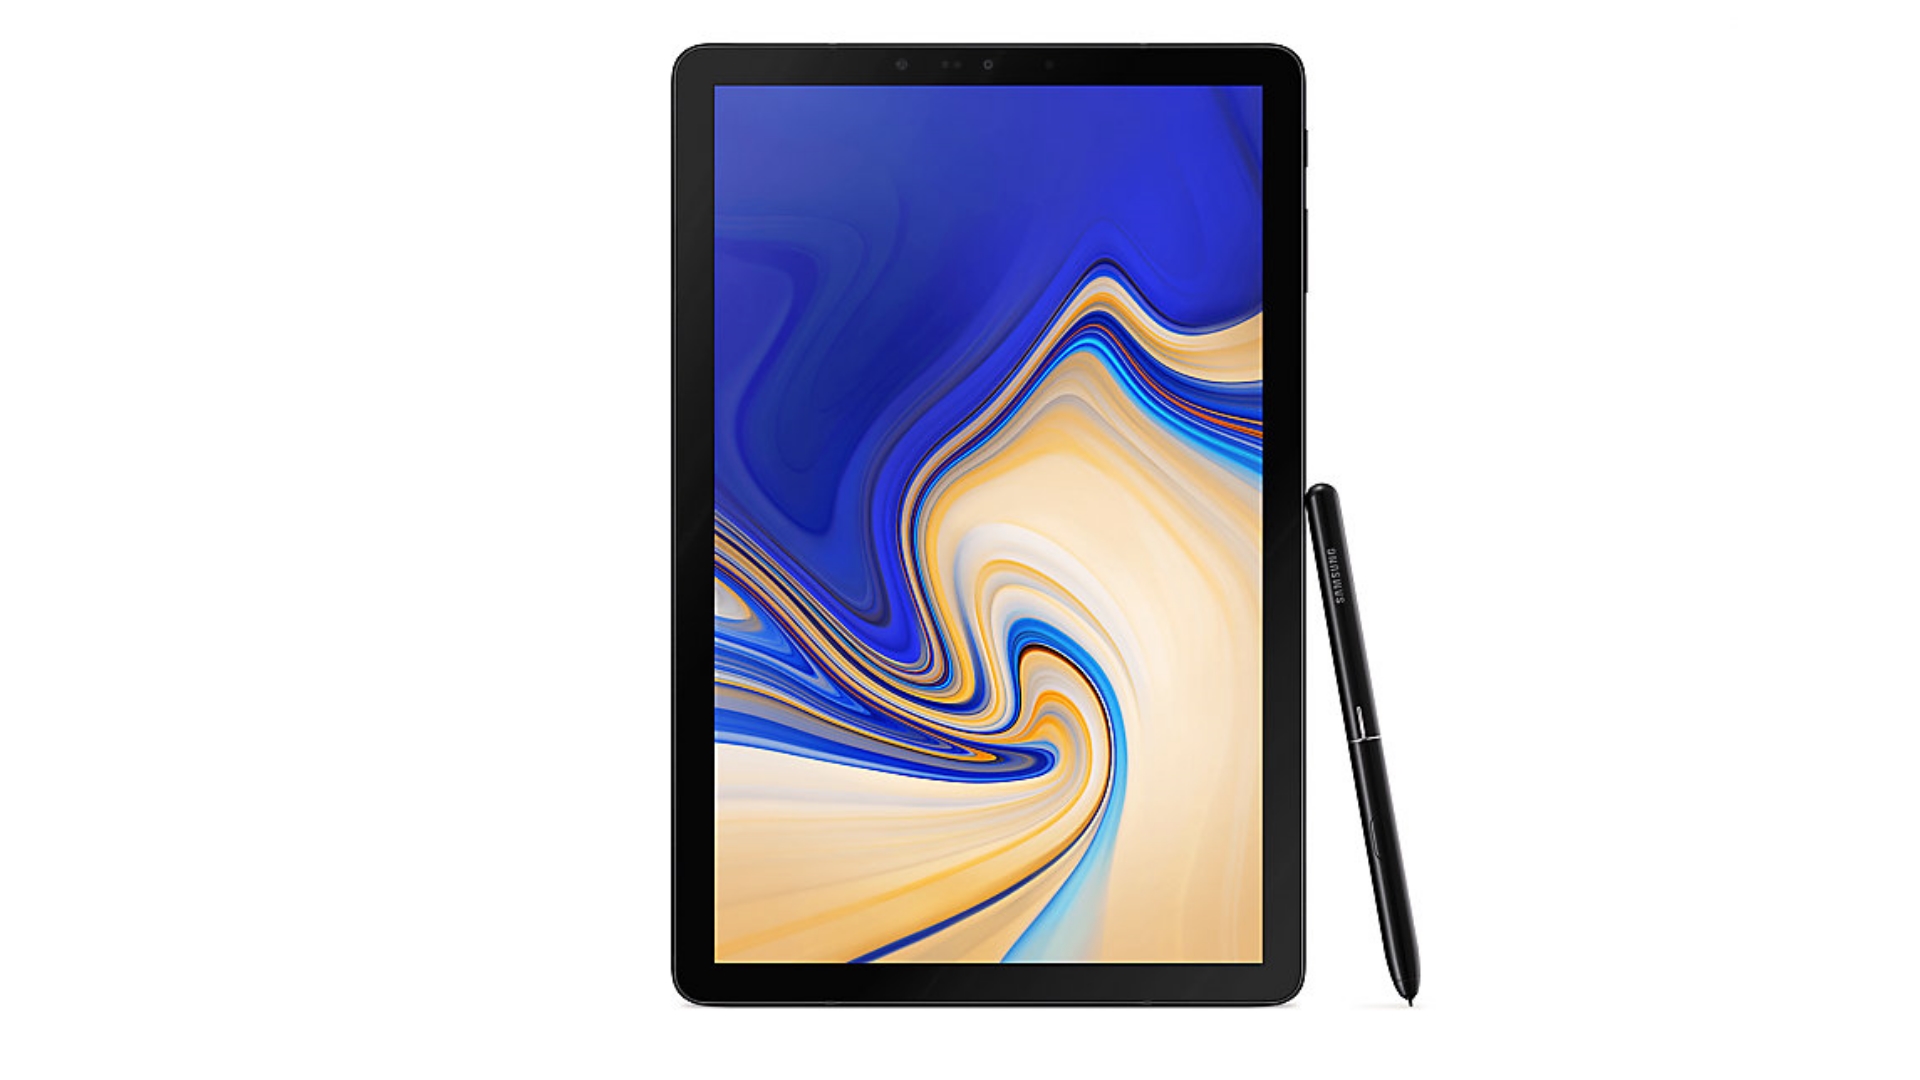 cheap Samsung Galaxy Tab S4 deals and prices